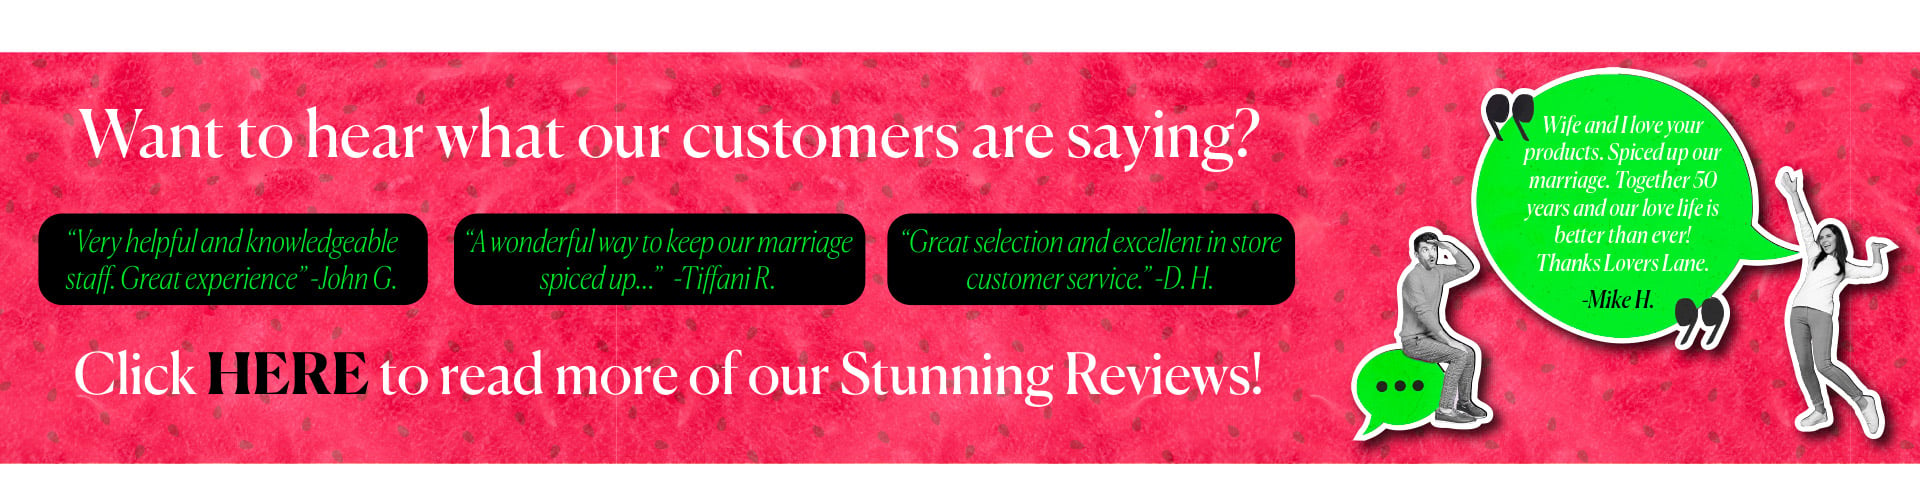 Want to hear what our customers are saying? - Click HERE to read more of our Stunning Reviews!